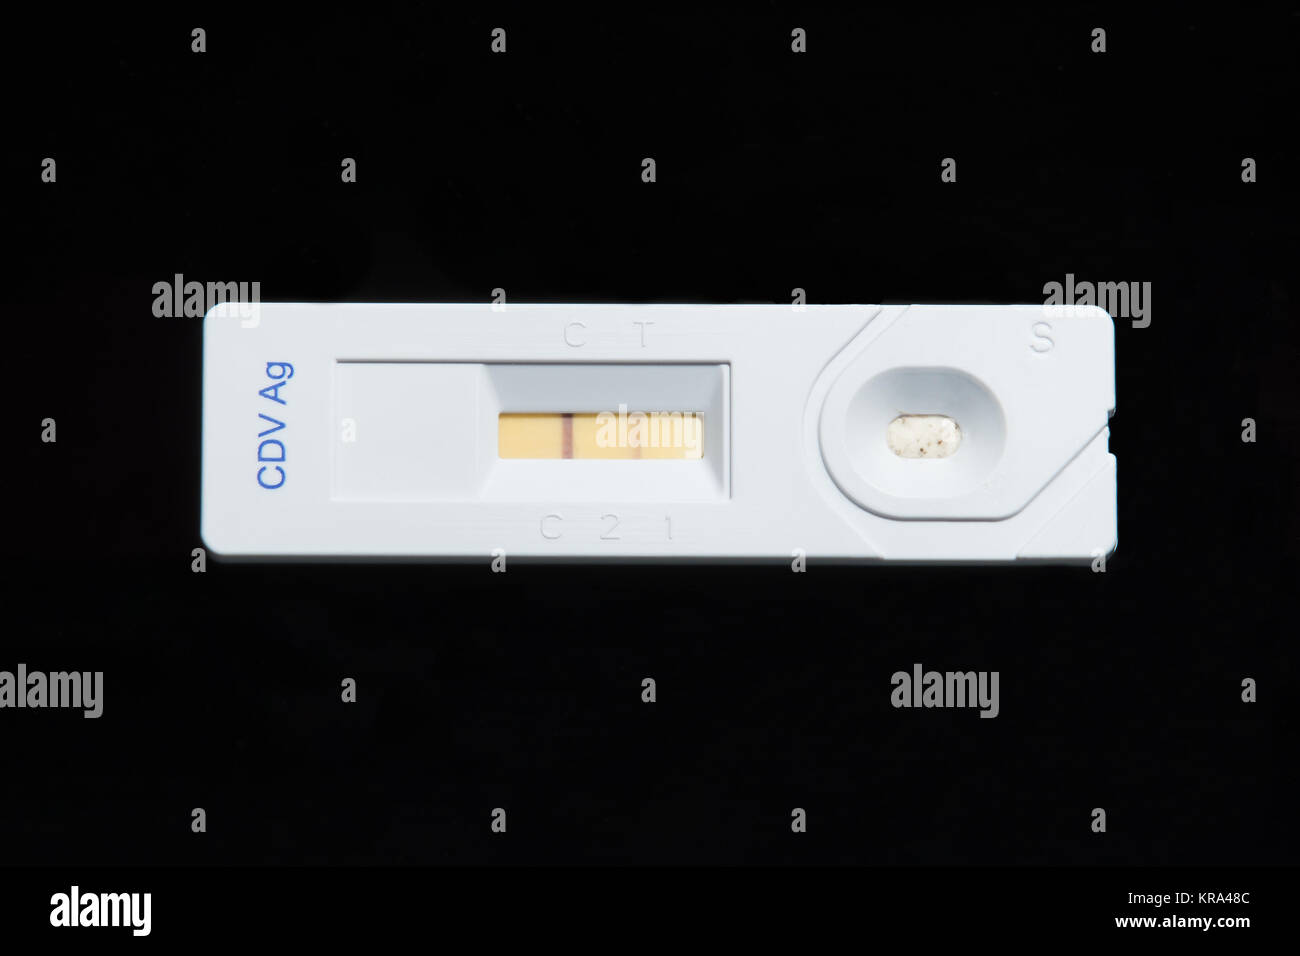 Canine distemper virus antigen test. Positive. Control line and test line are colored, indicating the presence of virus antigen in canine conjunctiva. Stock Photo